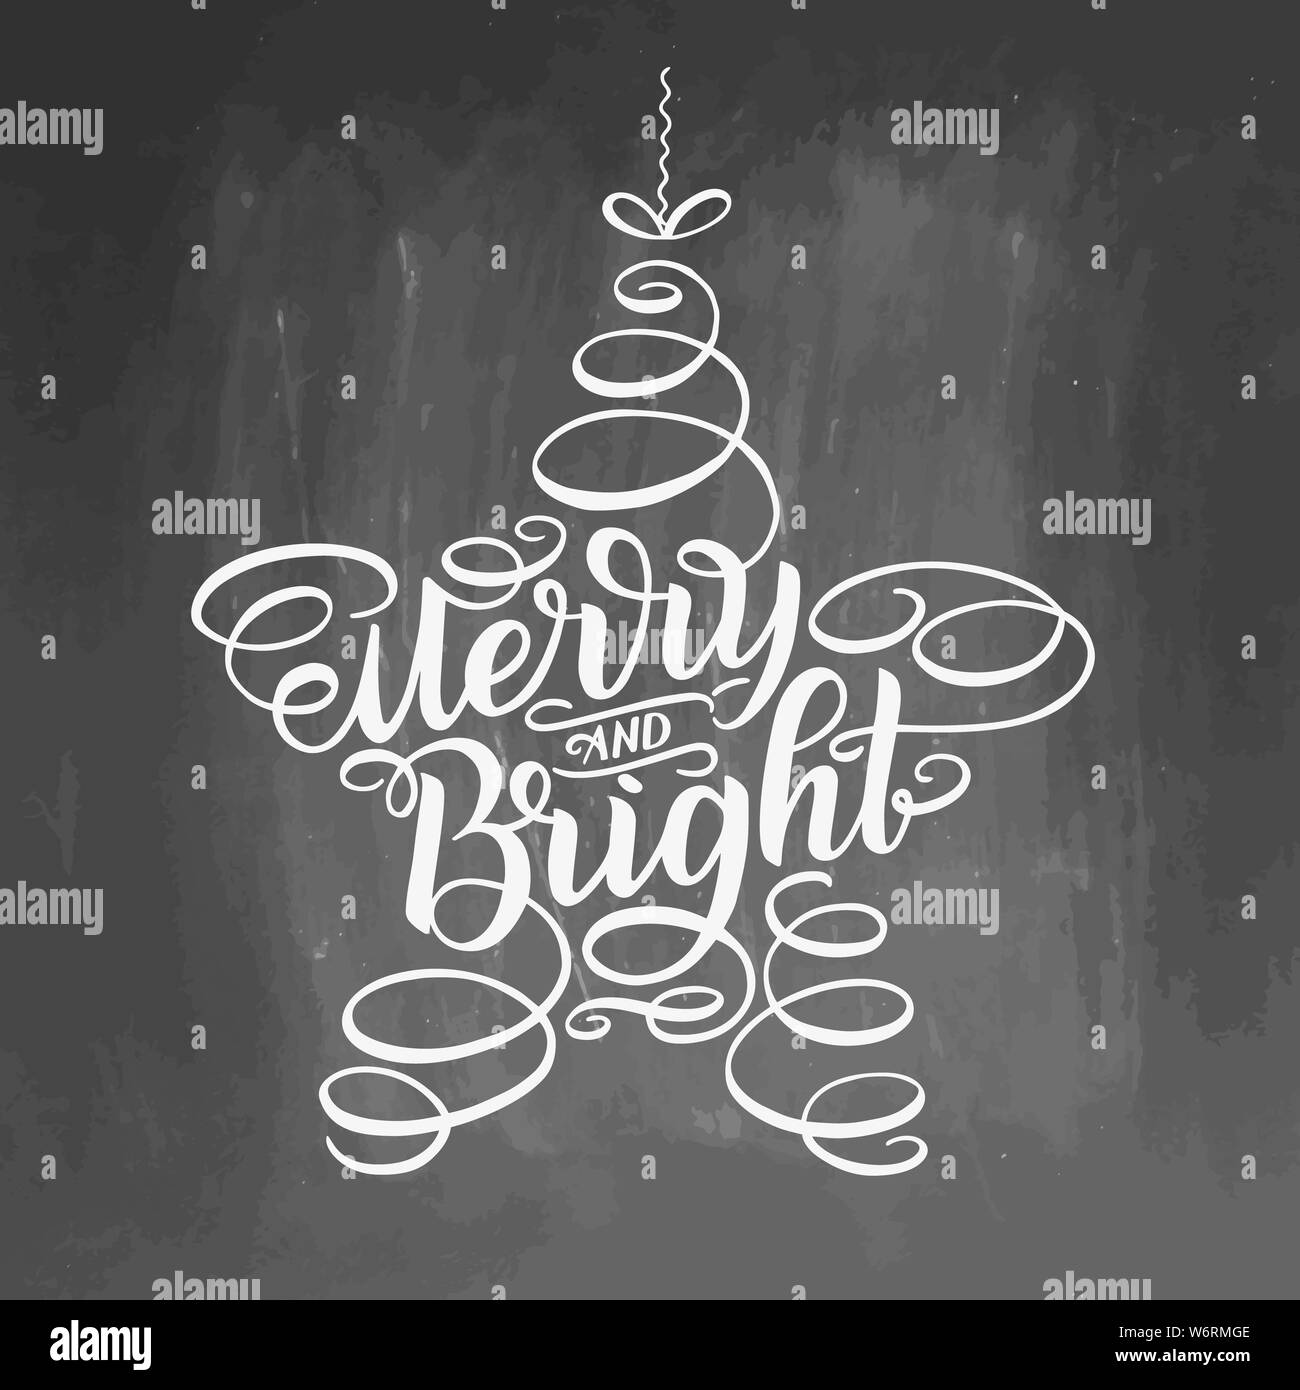 Merry and bright lettering framed in star tree toy. Hand drawn calligraphy lettering inspirational quotes. Chalkboard background, white letters,  illu Stock Photo